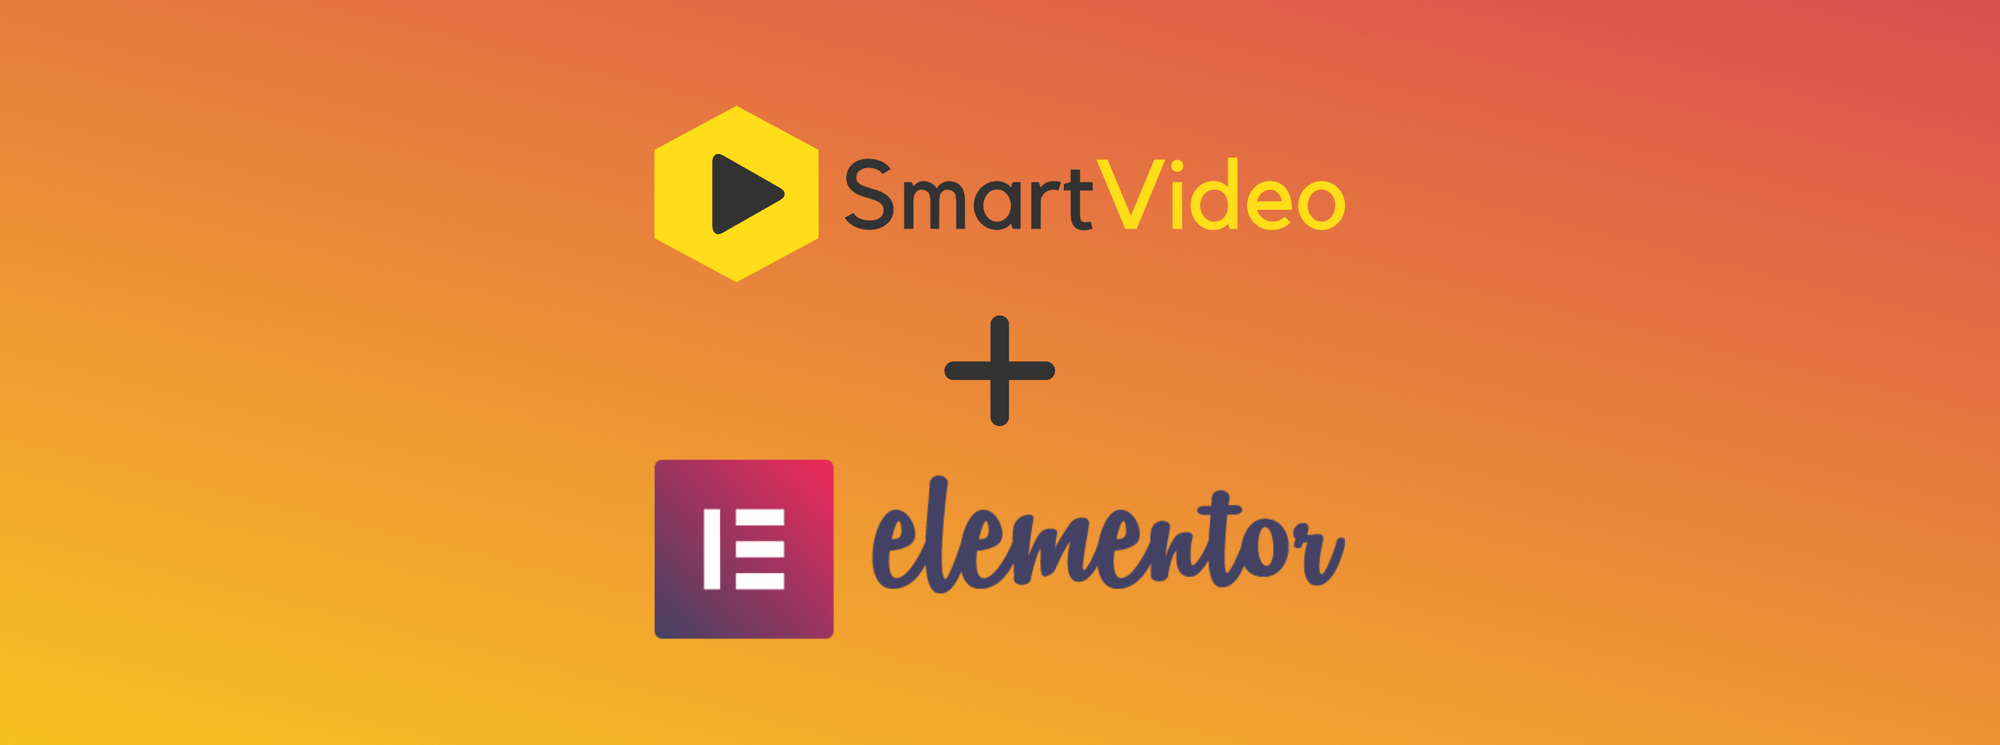 How to add videos to an Elementor website